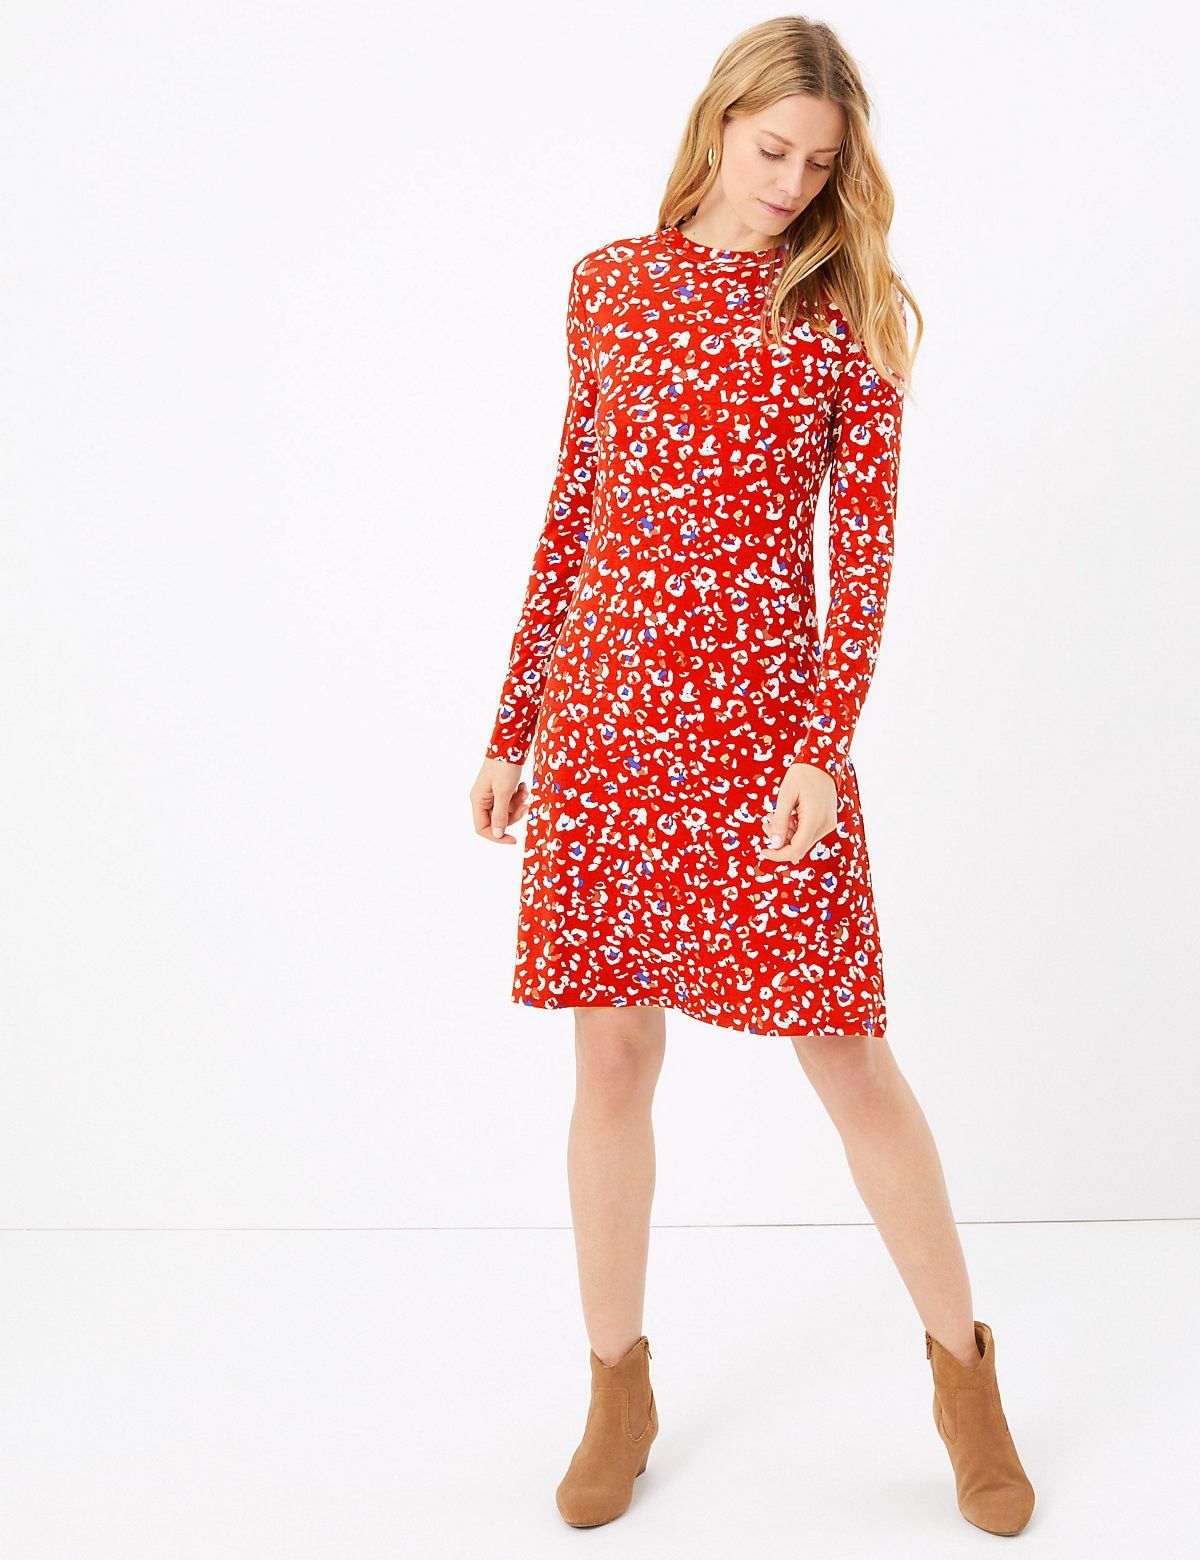 marks and spencer jersey dress